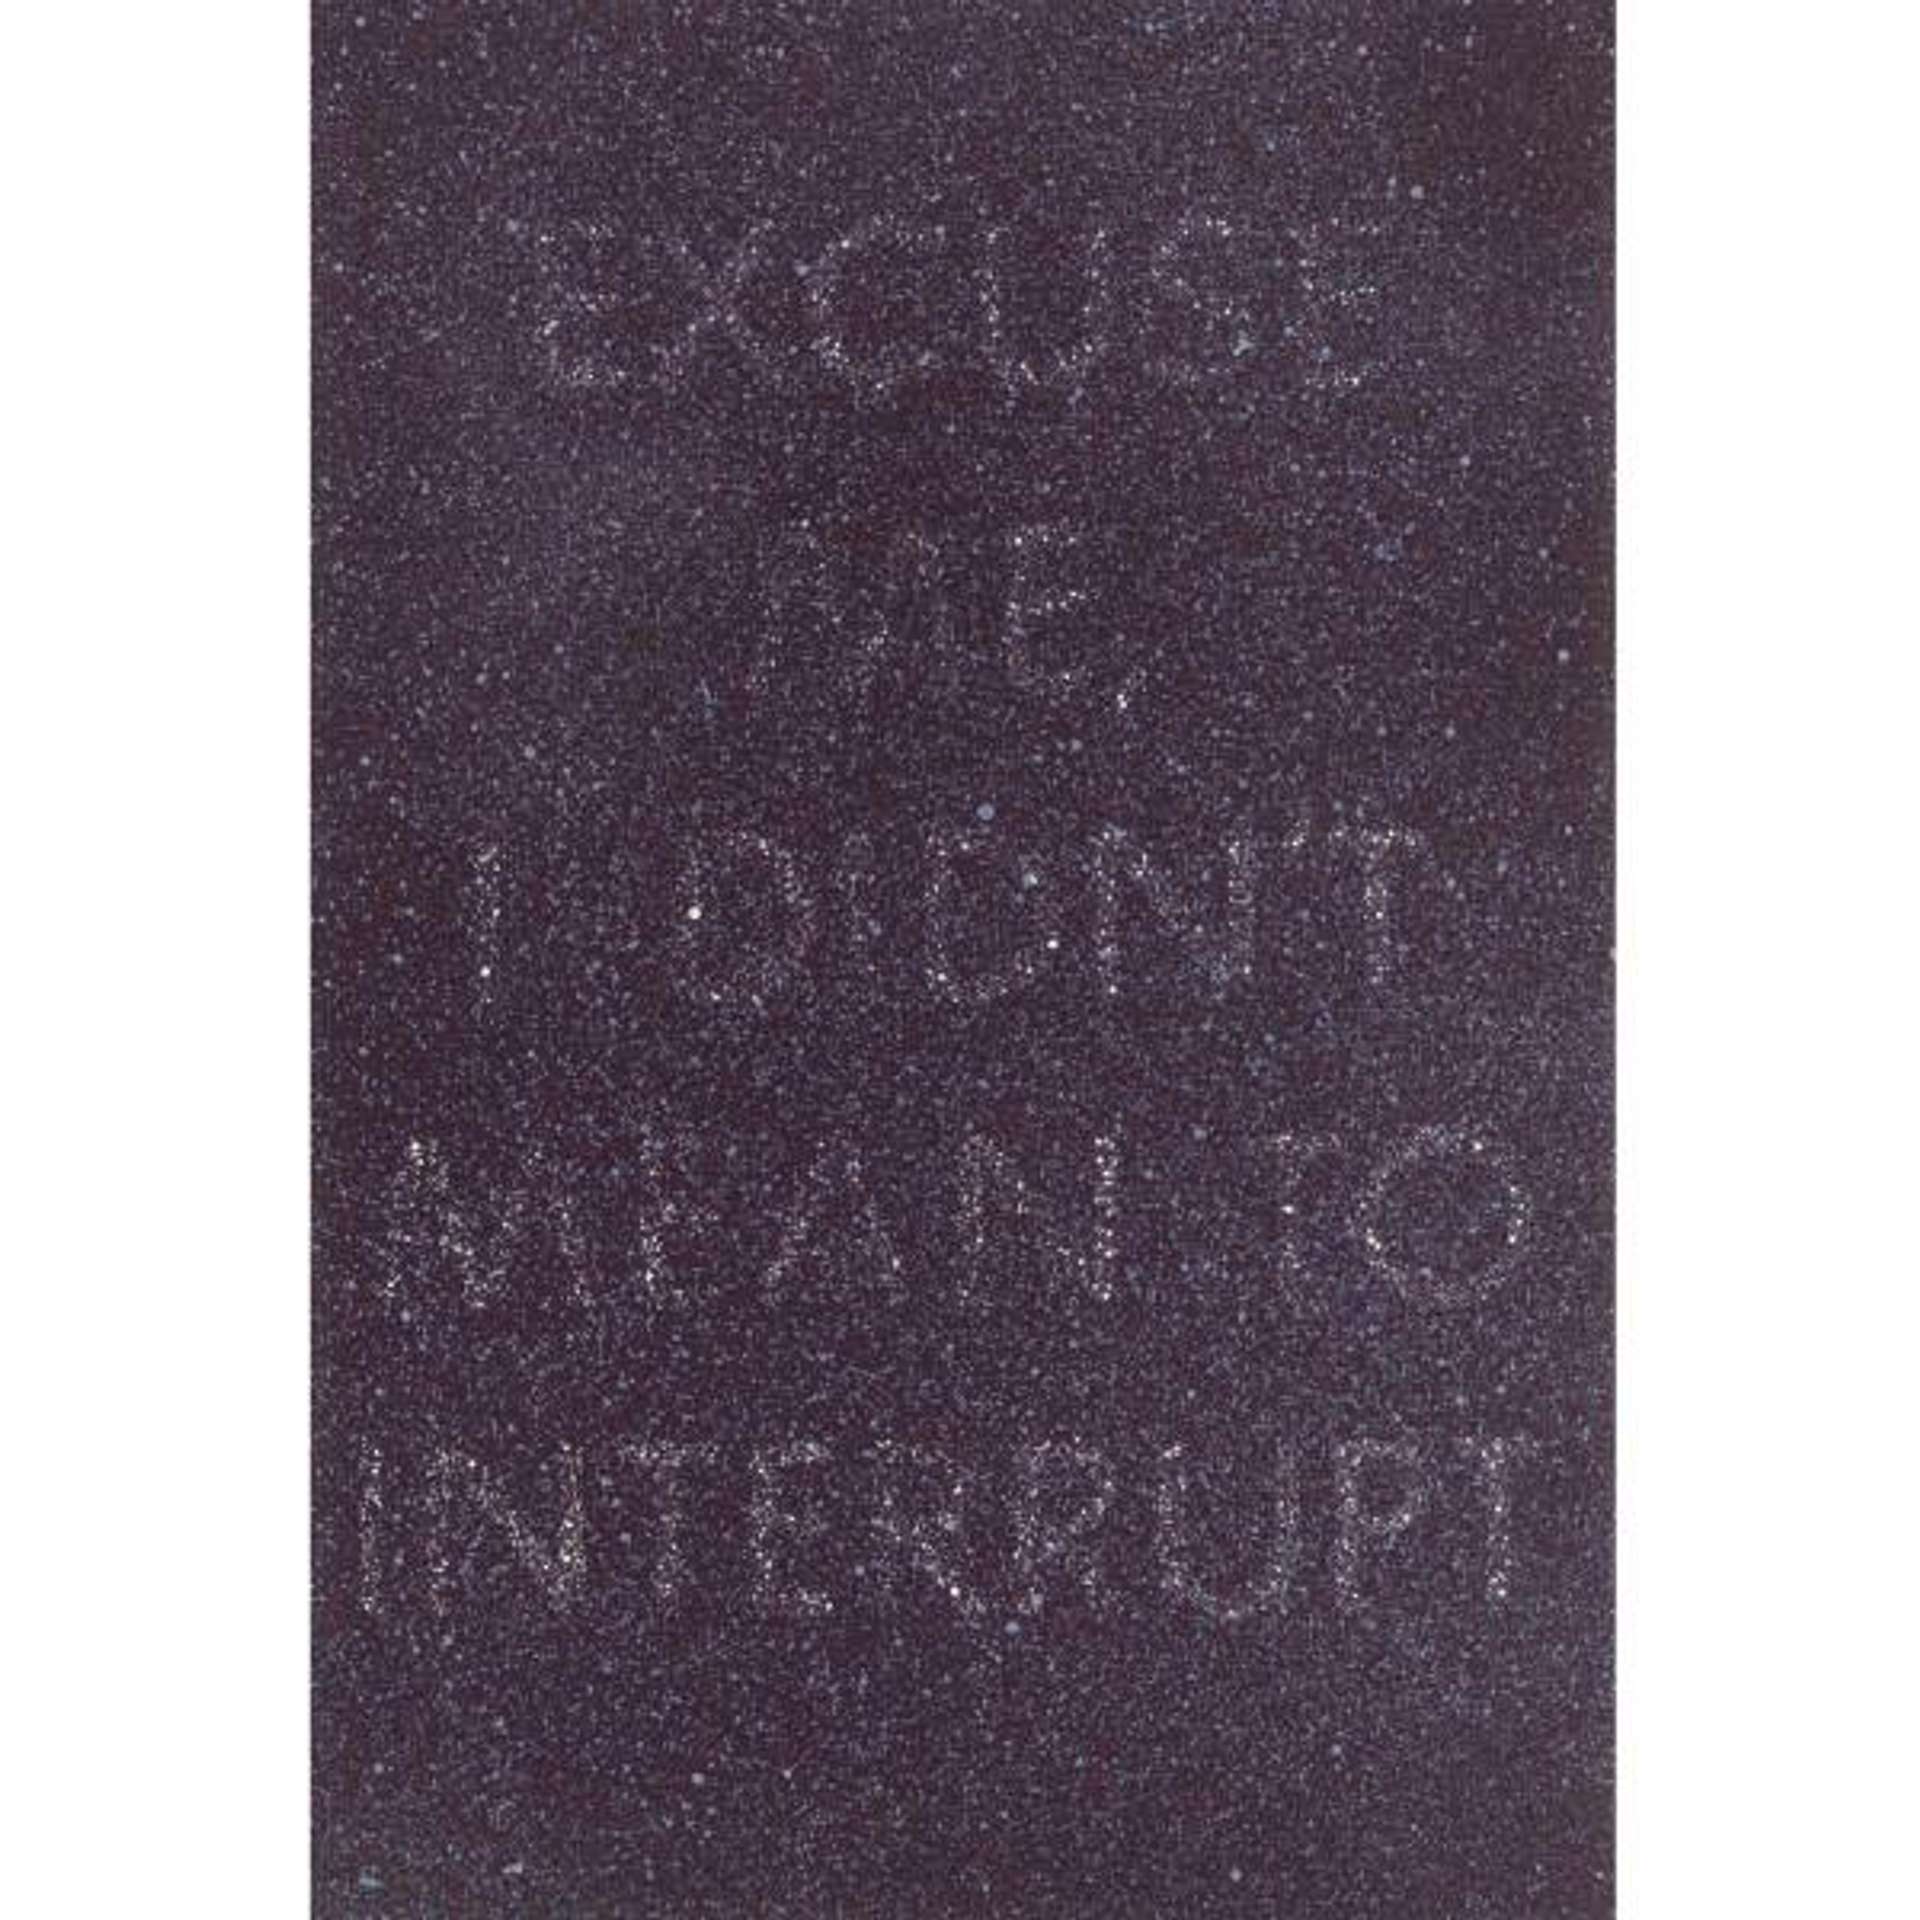 Colour lithograph by Ed Ruscha depicting the words 'EXCUSE ME, I DIDN'T MEAN TO INTERRUPT' in grainy white and light purple lettering, set against a deep indigo grainy background.